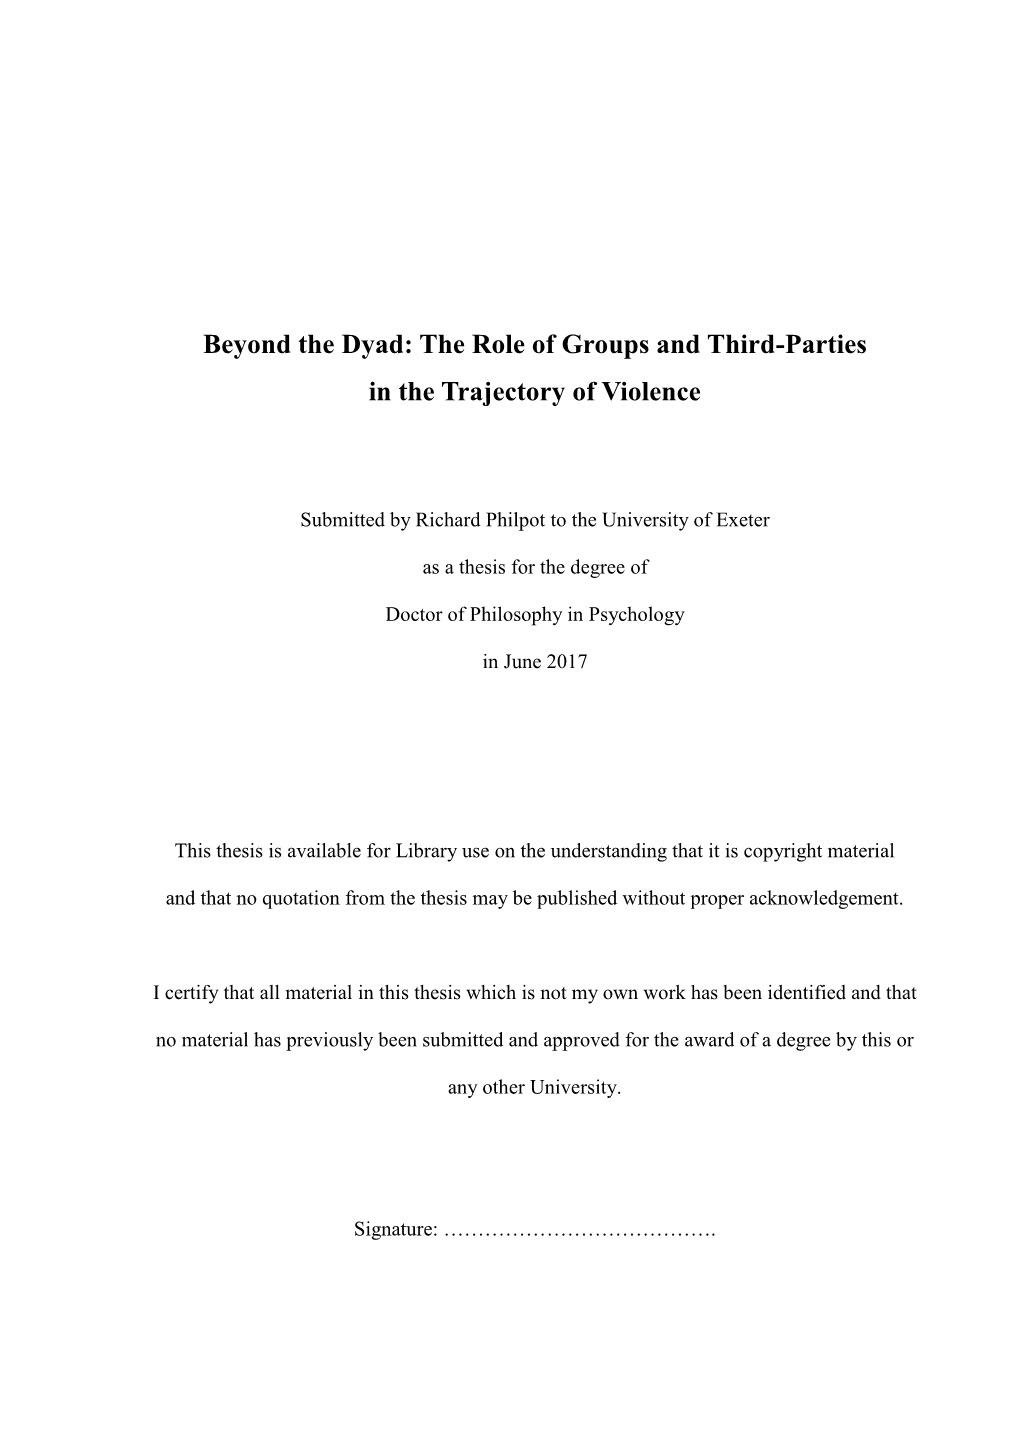 The Role of Groups and Third-Parties in the Trajectory of Violence